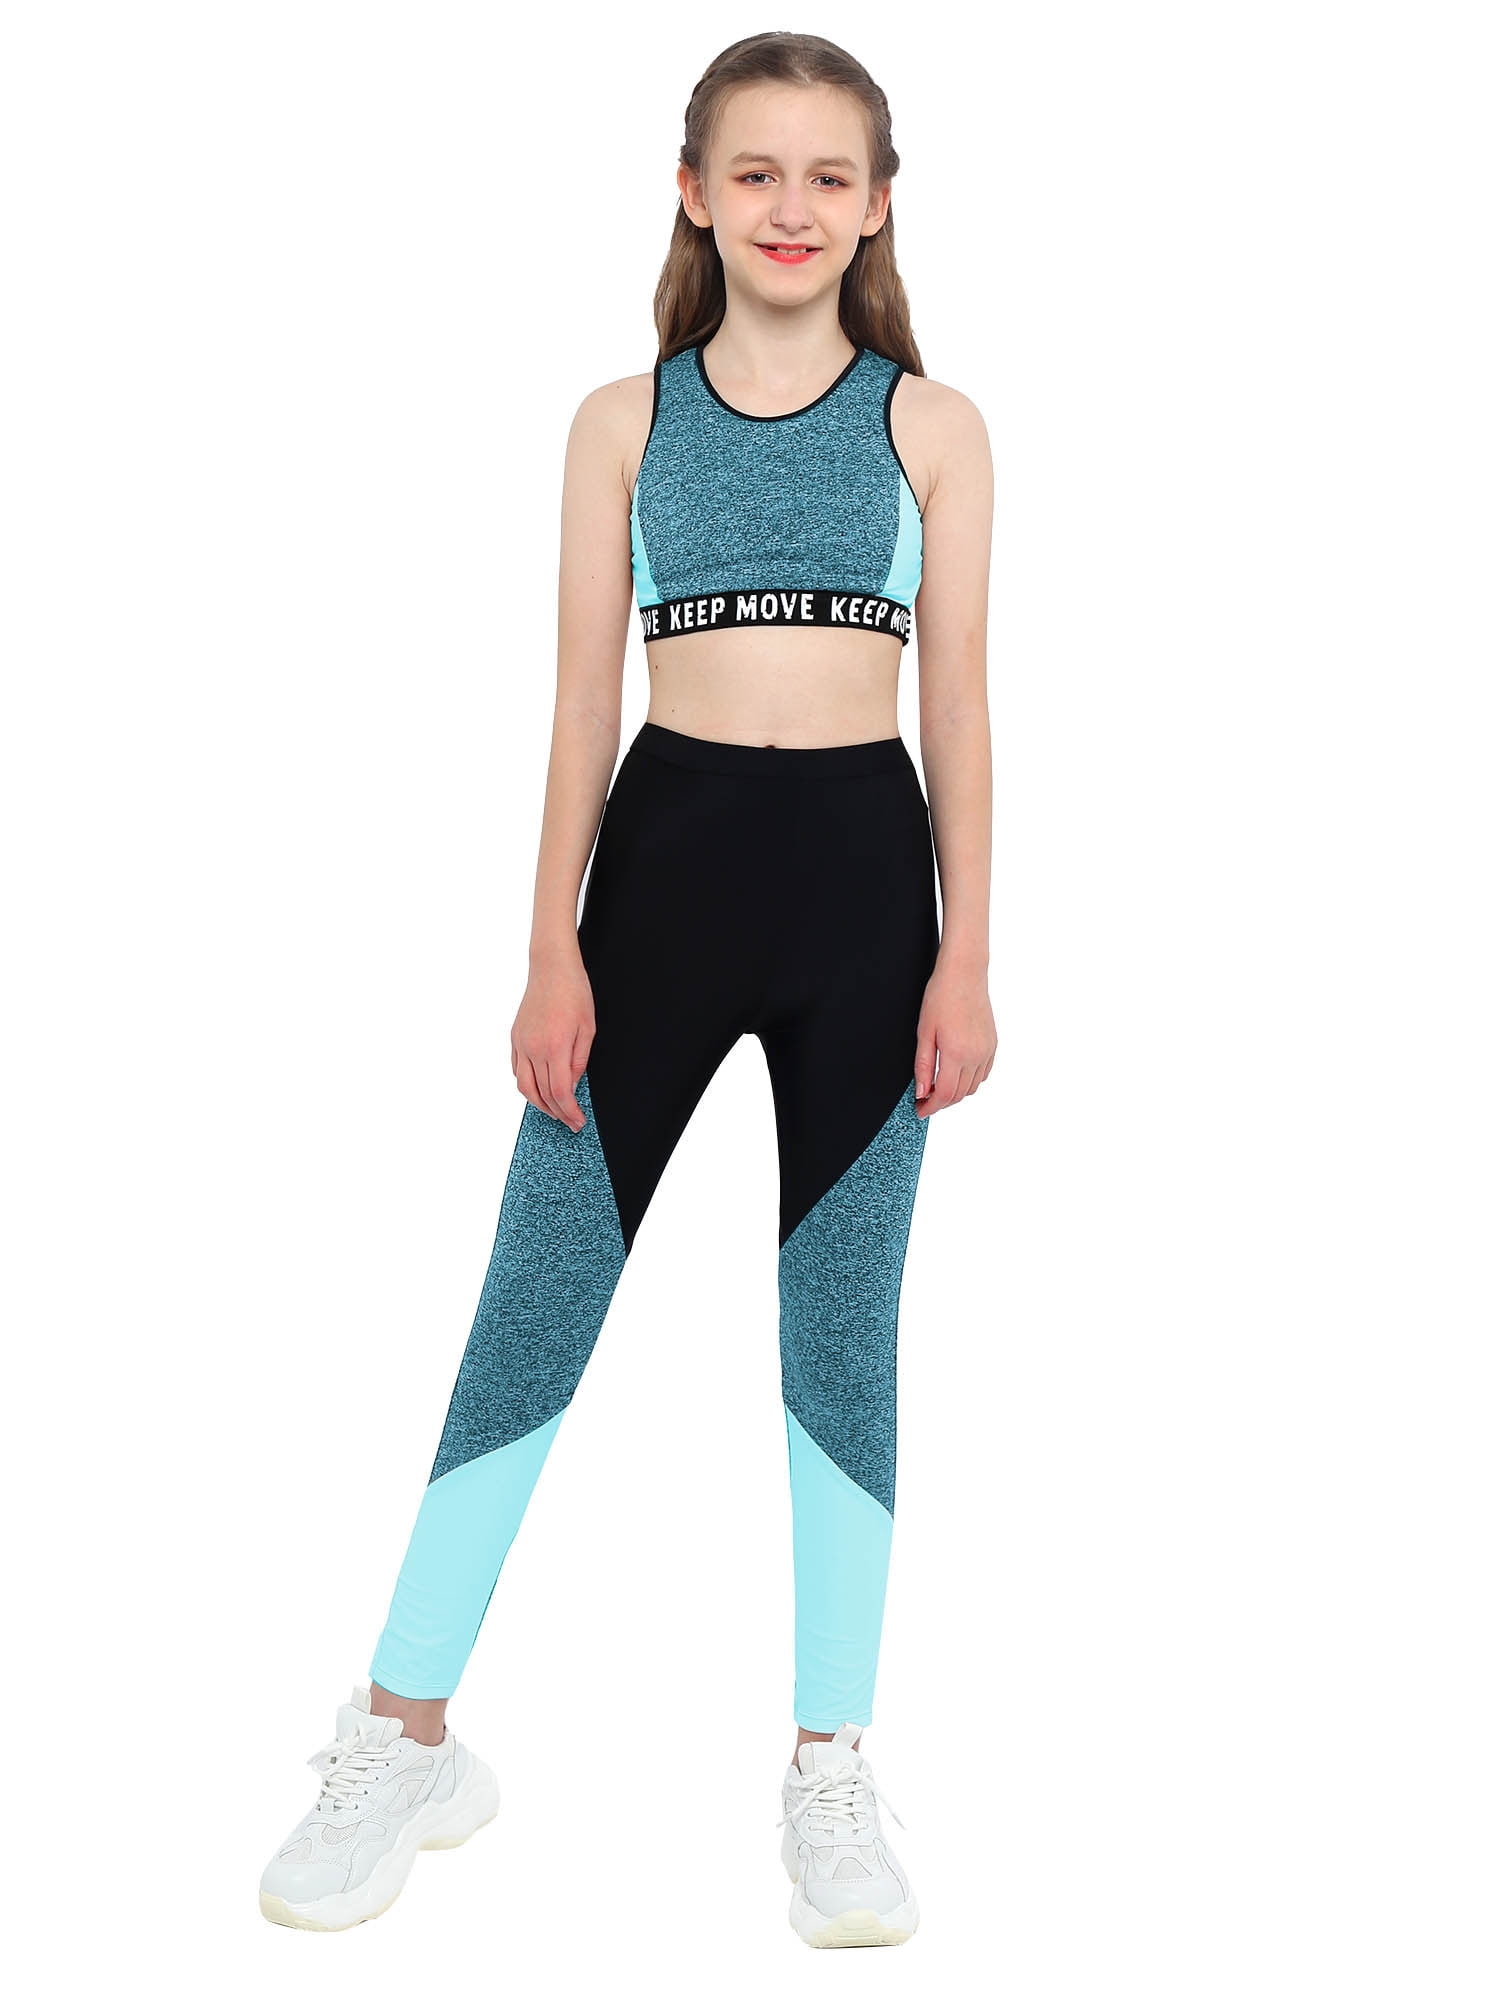 inhzoy Kids Girls Athletic Outfit Sports Bra Crop Top with Yoga Leggings  Blue 16